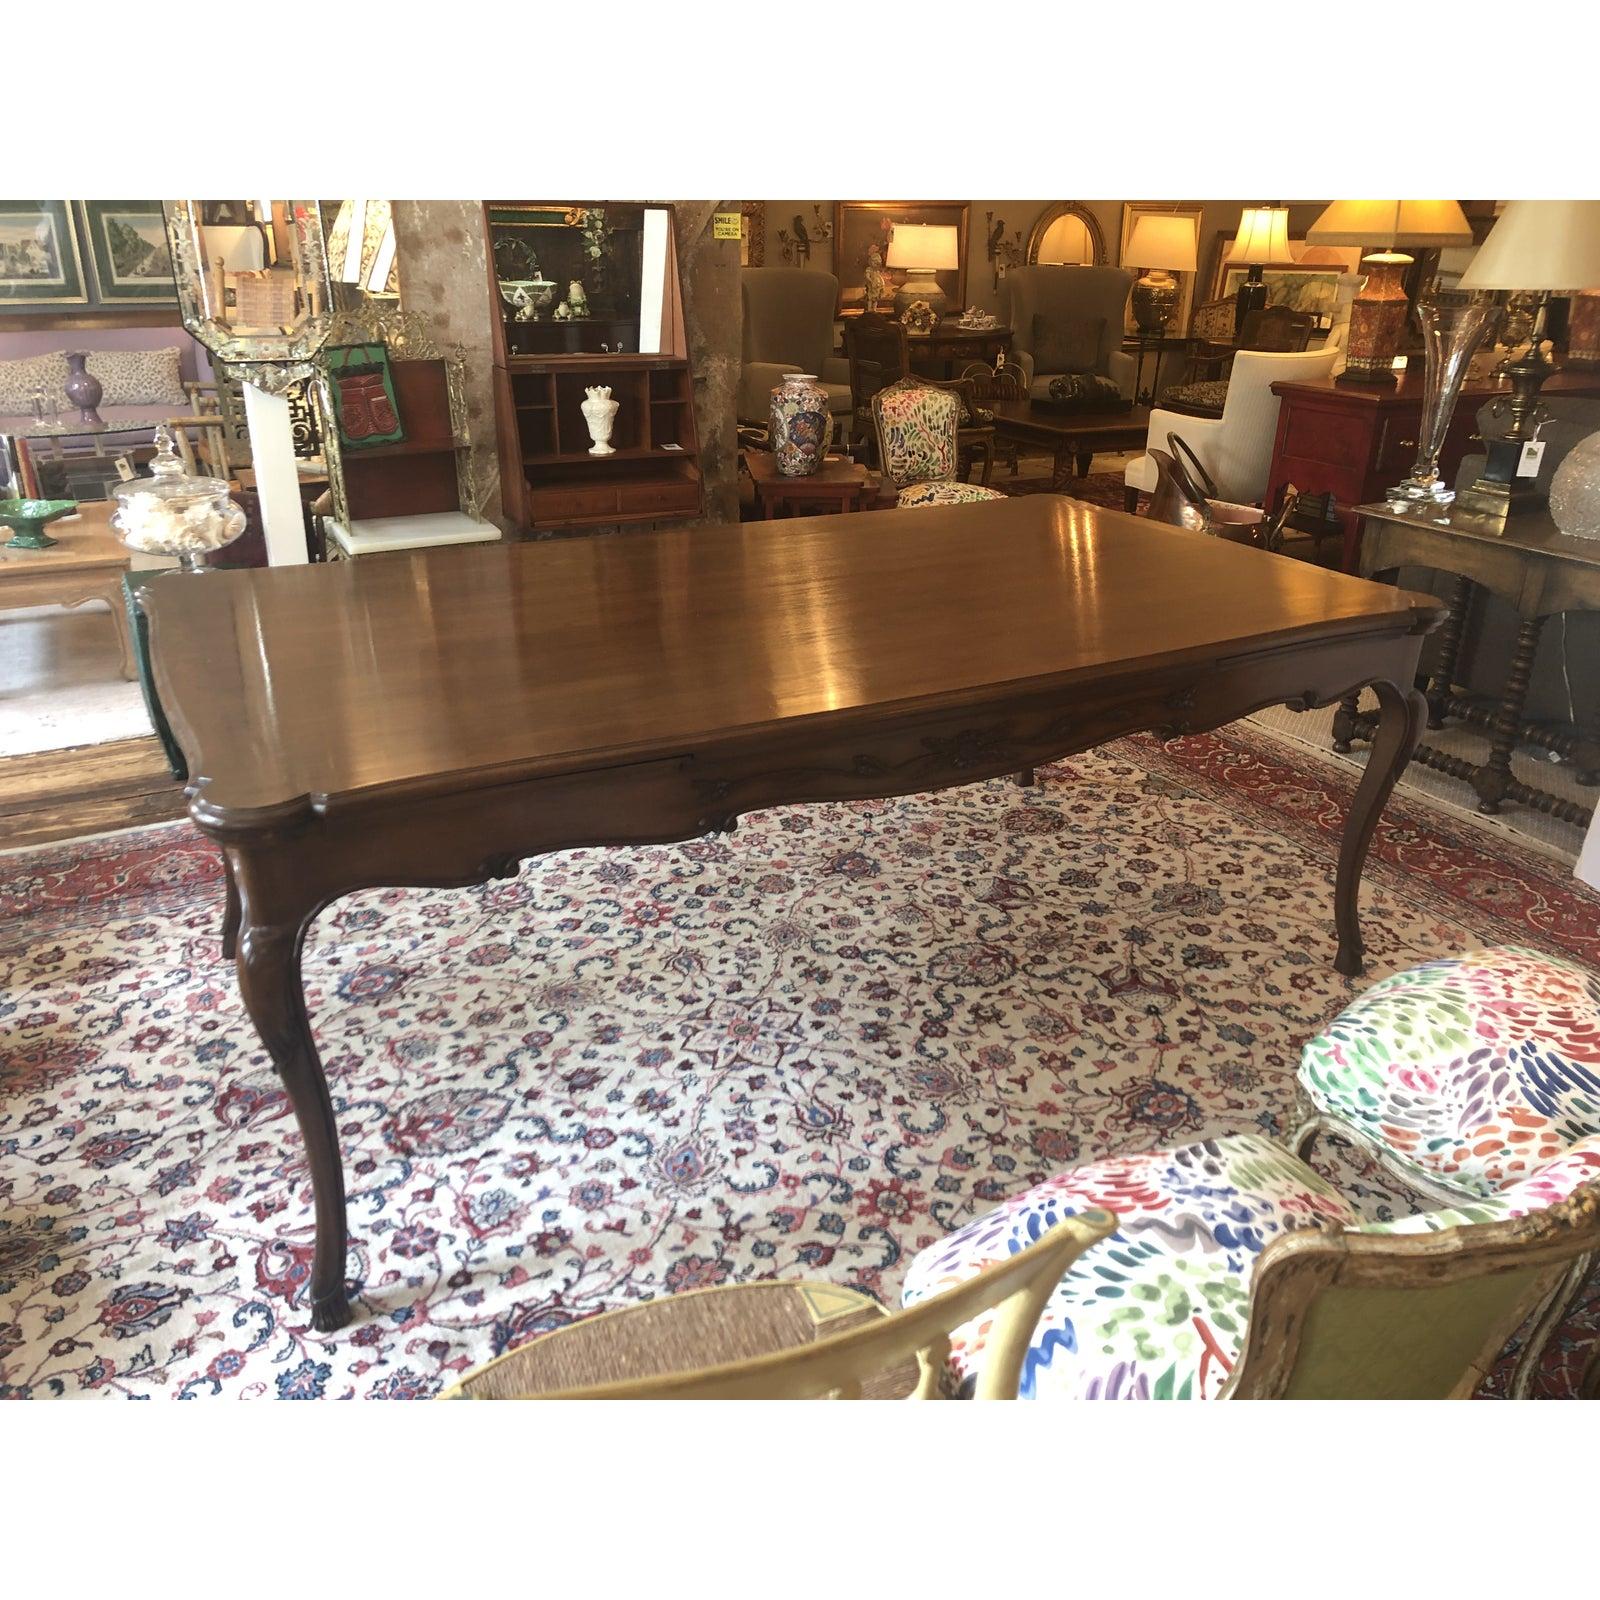 A magnificent carved walnut 7 foot French Provincial style dining table having hidden leaves at each end that pull out to create a grand almost 11 foot table. The apron has beautiful carvings with flowers and foliage and w the lovely legs are